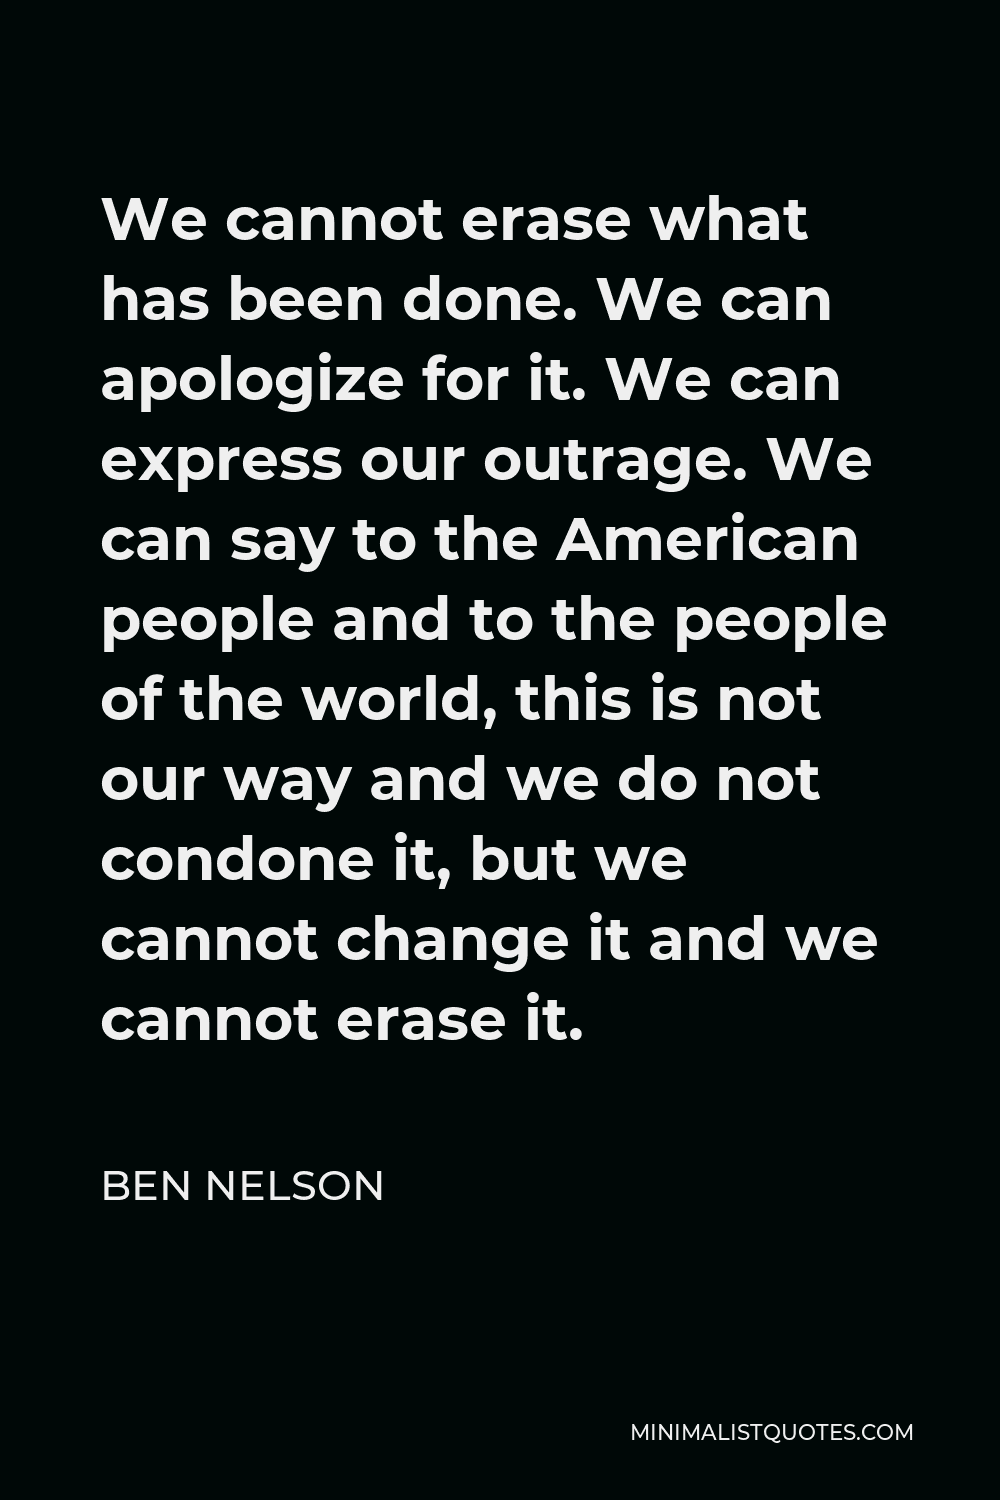 Ben Nelson Quote - We cannot erase what has been done. We can apologize for it. We can express our outrage. We can say to the American people and to the people of the world, this is not our way and we do not condone it, but we cannot change it and we cannot erase it.